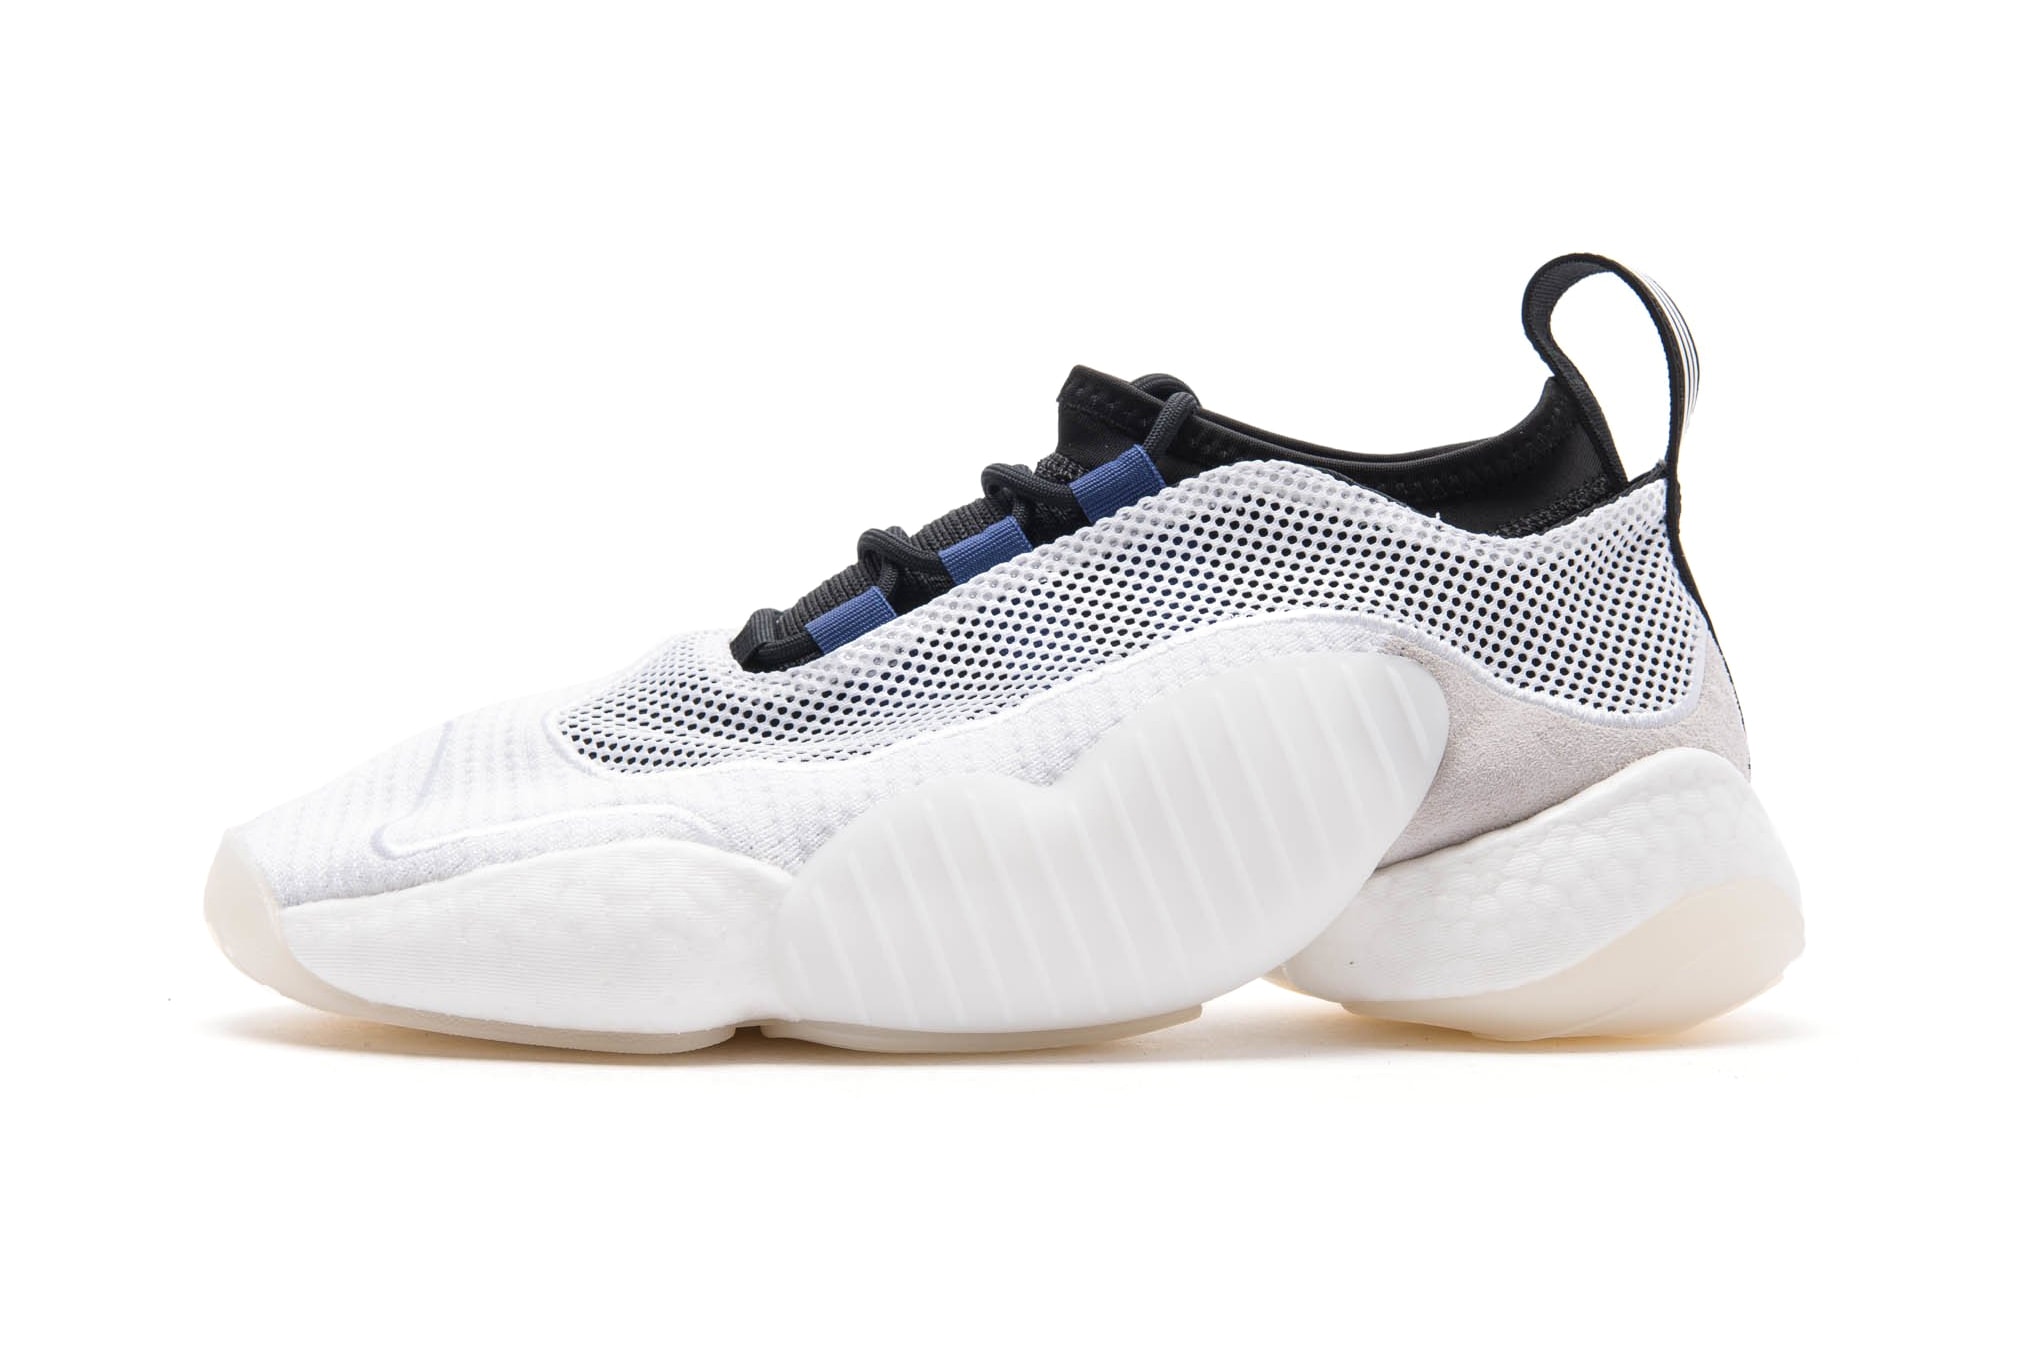 adidas Crazy BYW LVL 2 White Black fall 2018 release sneakers